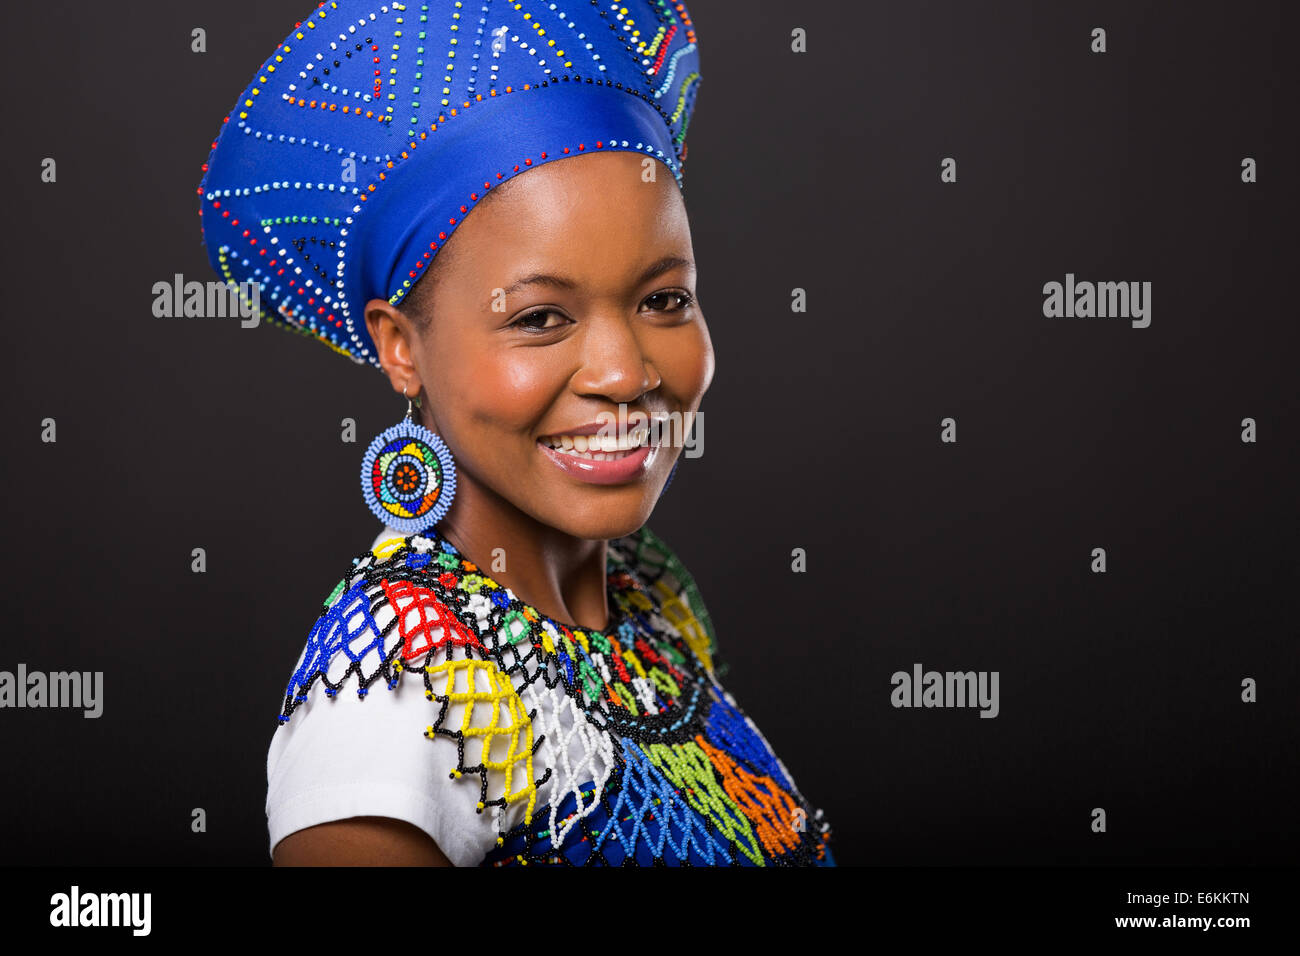 https://c8.alamy.com/comp/E6KKTN/smiling-zulu-woman-in-traditional-clothes-looking-at-the-camera-on-E6KKTN.jpg